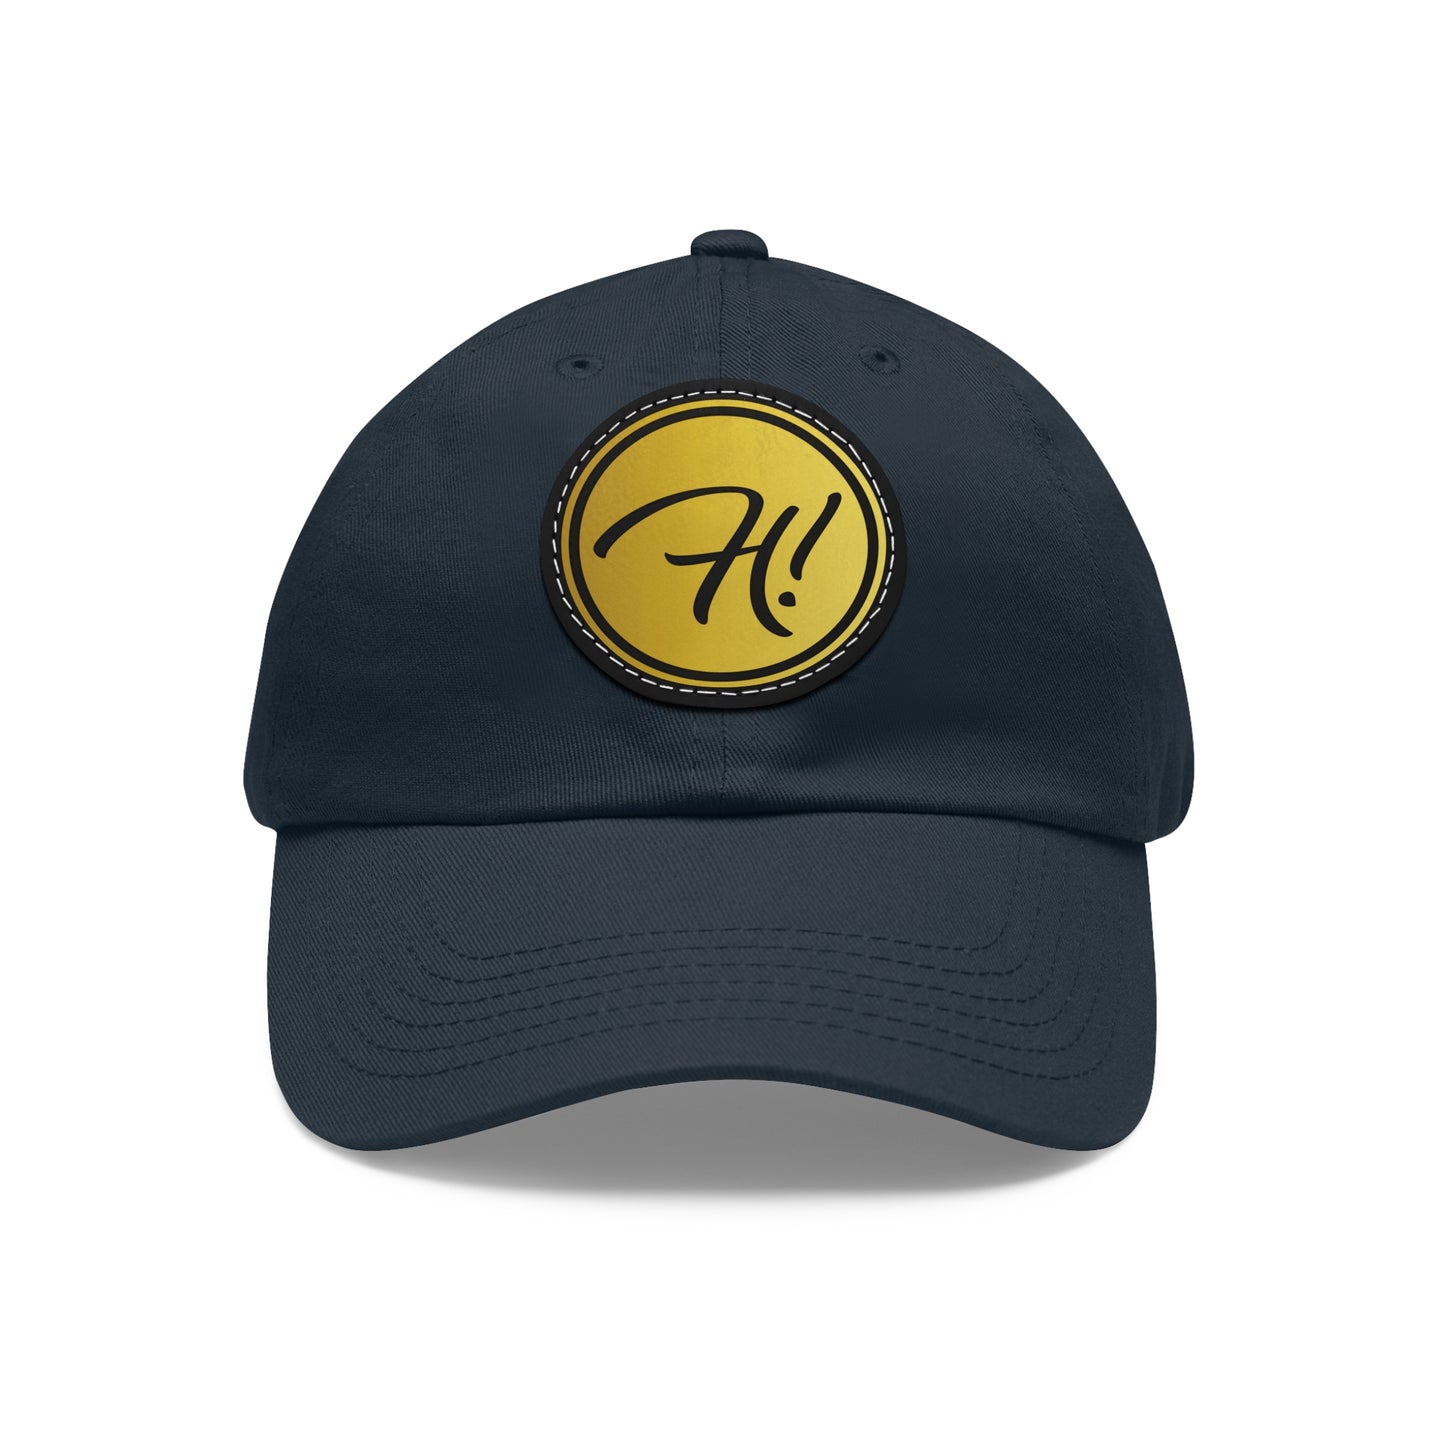 Helga's Hi Hat with Leather Patch Logo - 6 color options!